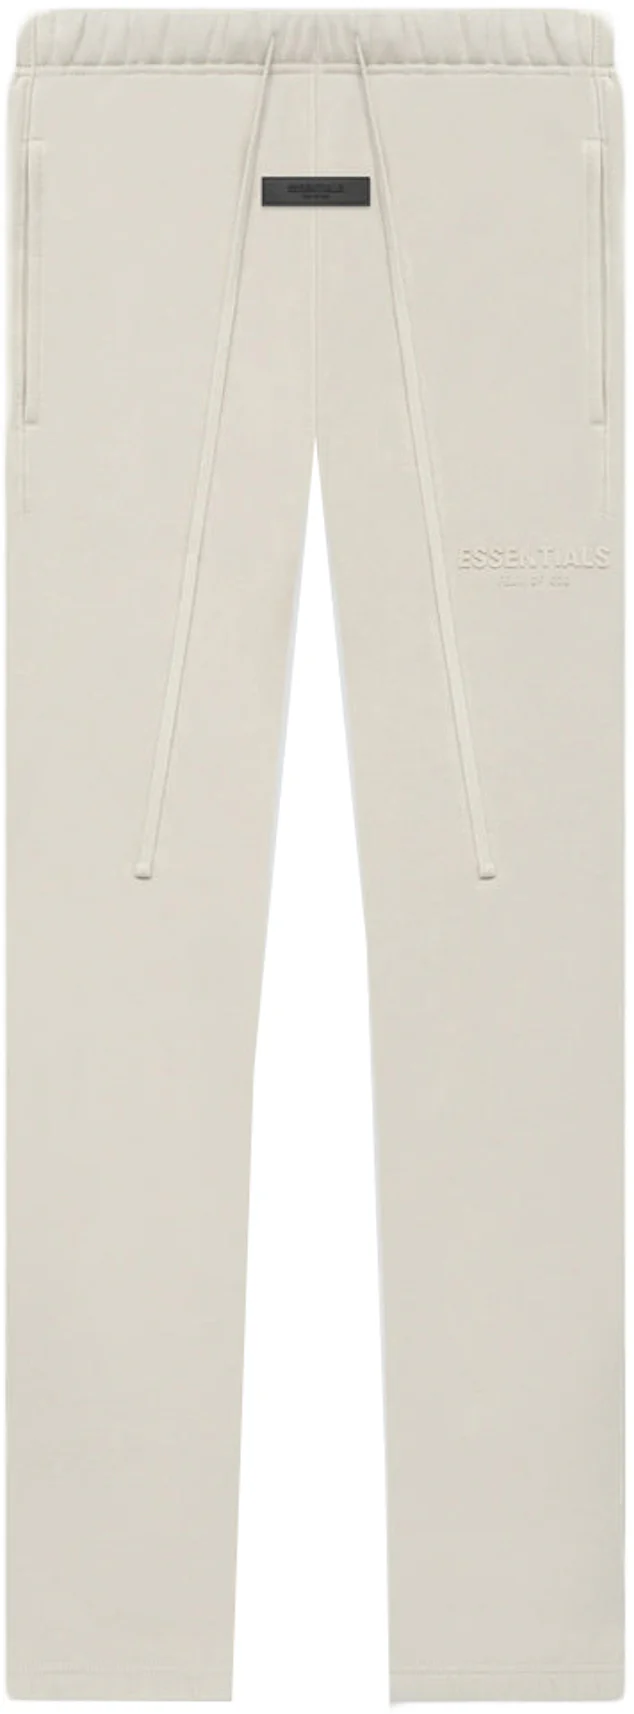 NEW Fear of God Essentials SS22 Relaxed Sweatpants (Iron and Wheat) -  Review + Cuffed vs Relaxed 